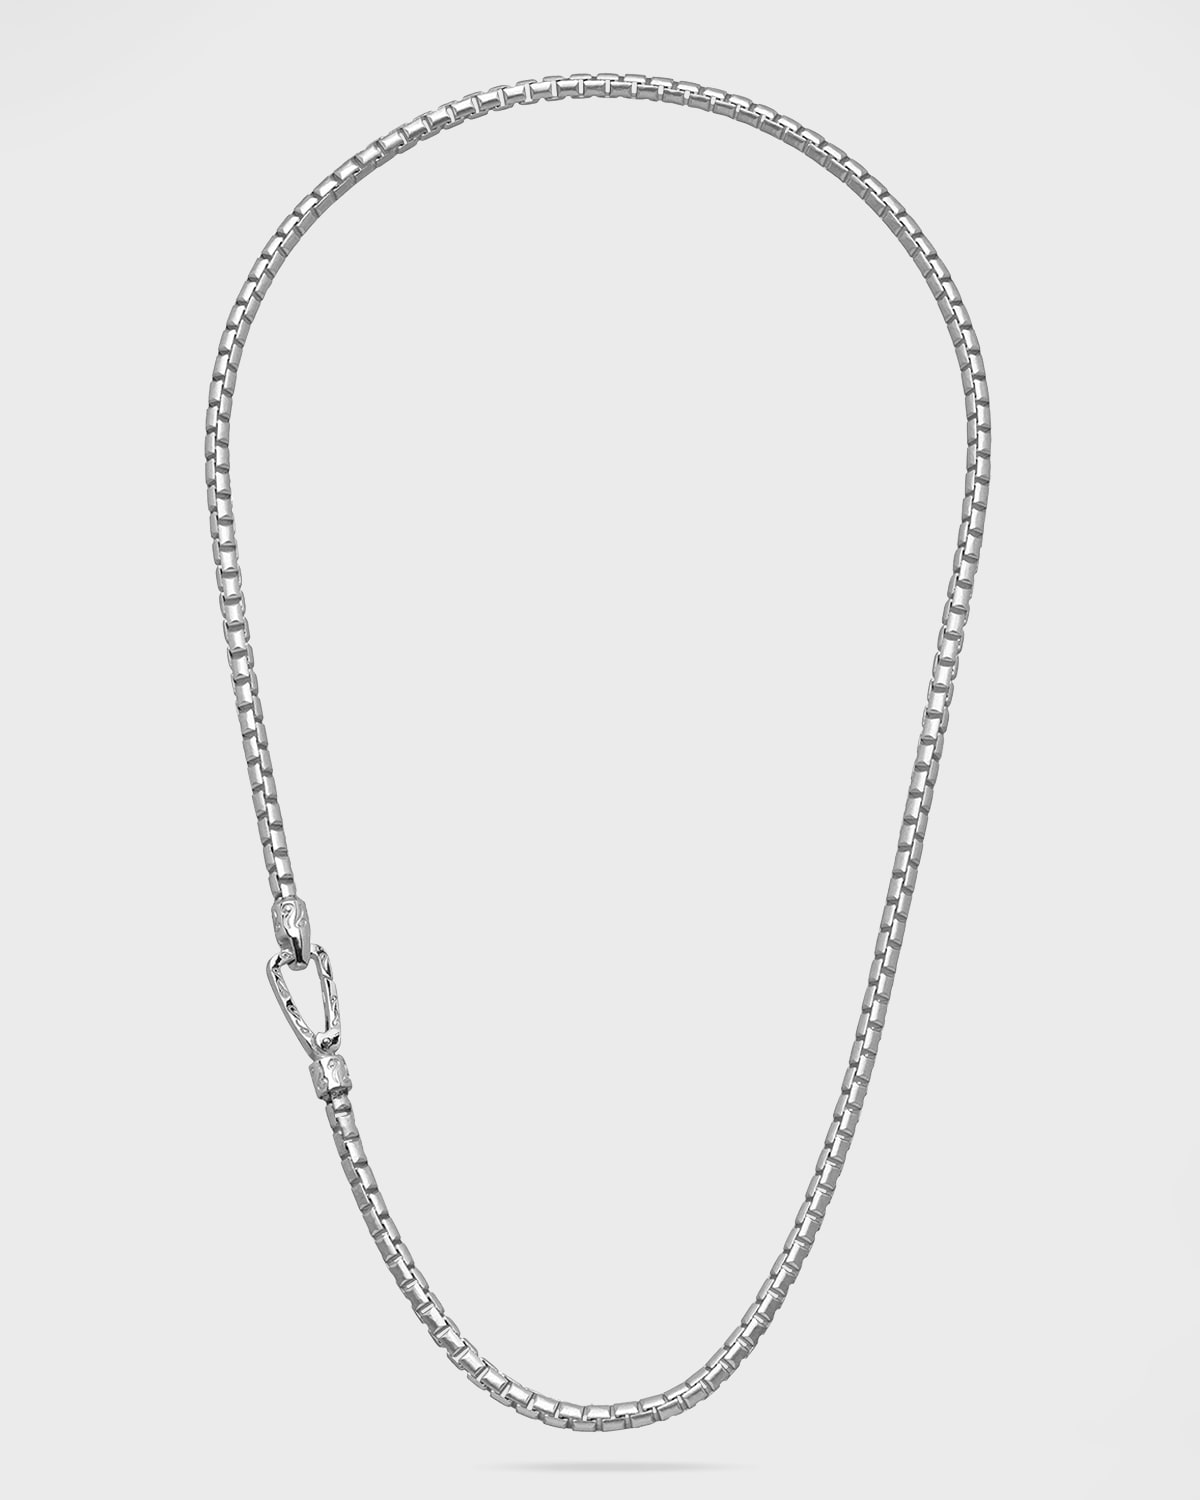 Marco Dal Maso Carved Tubular White Polished Silver Necklace With Matte Chain And Polished Clasp, 20"l